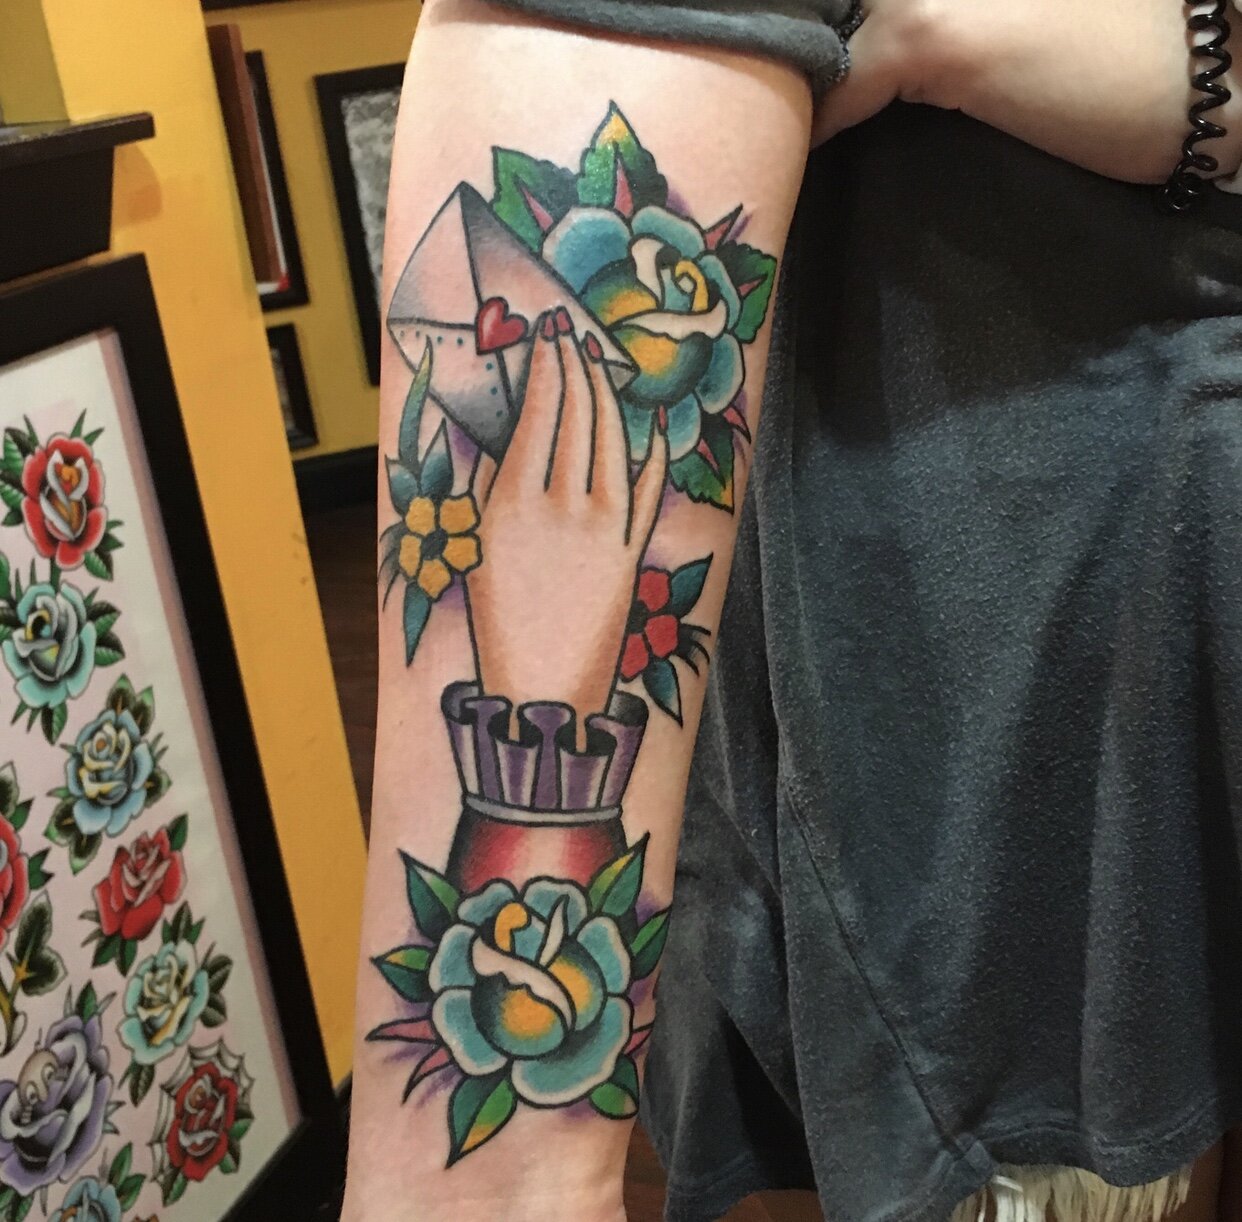 Love letter tattoo with roses by Andrew Patch at Southern Star Tattoo in Atlanta, Georgia.